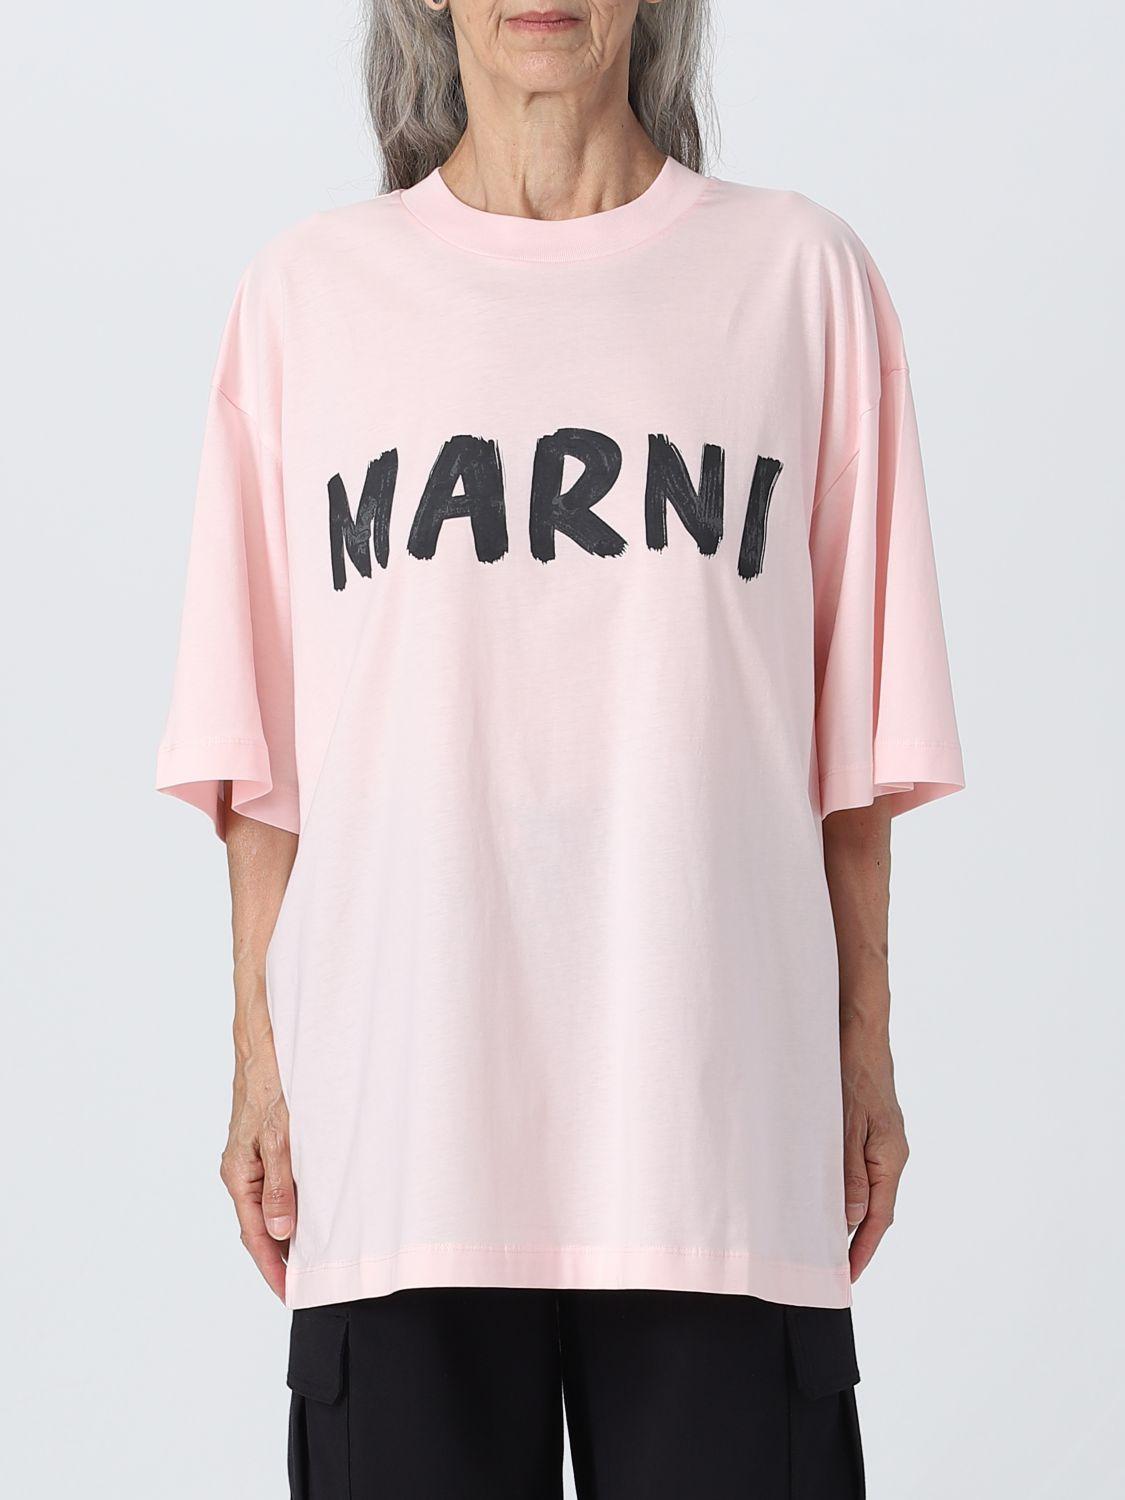 Marni T-shirt in Pink | Lyst UK